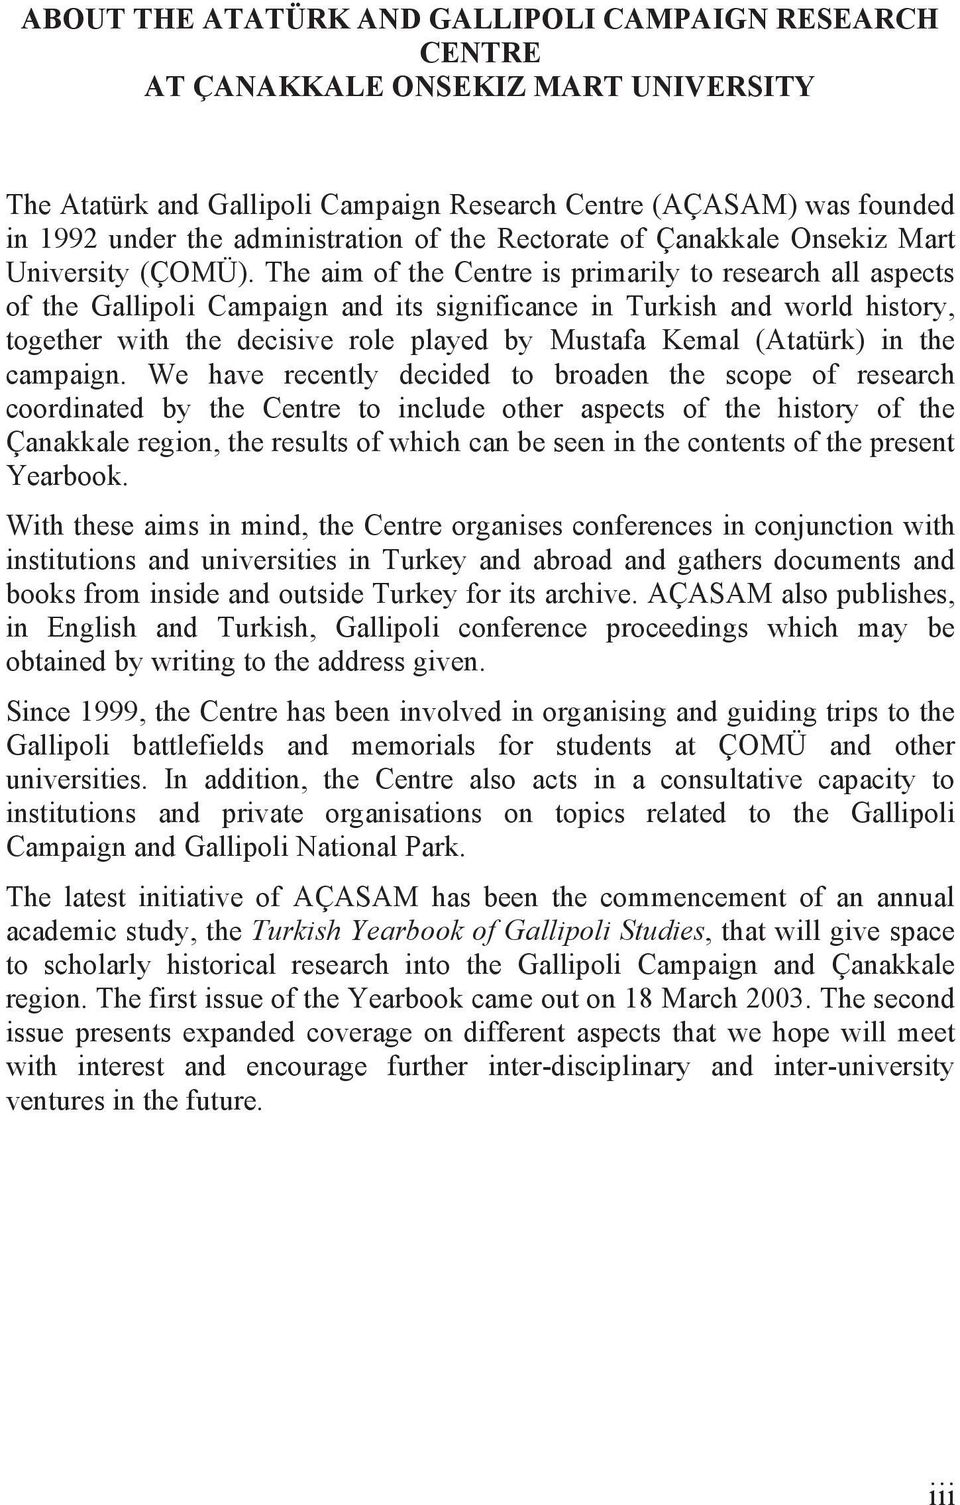 The aim of the Centre is primarily to research all aspects of the Gallipoli Campaign and its significance in Turkish and world history, together with the decisive role played by Mustafa Kemal